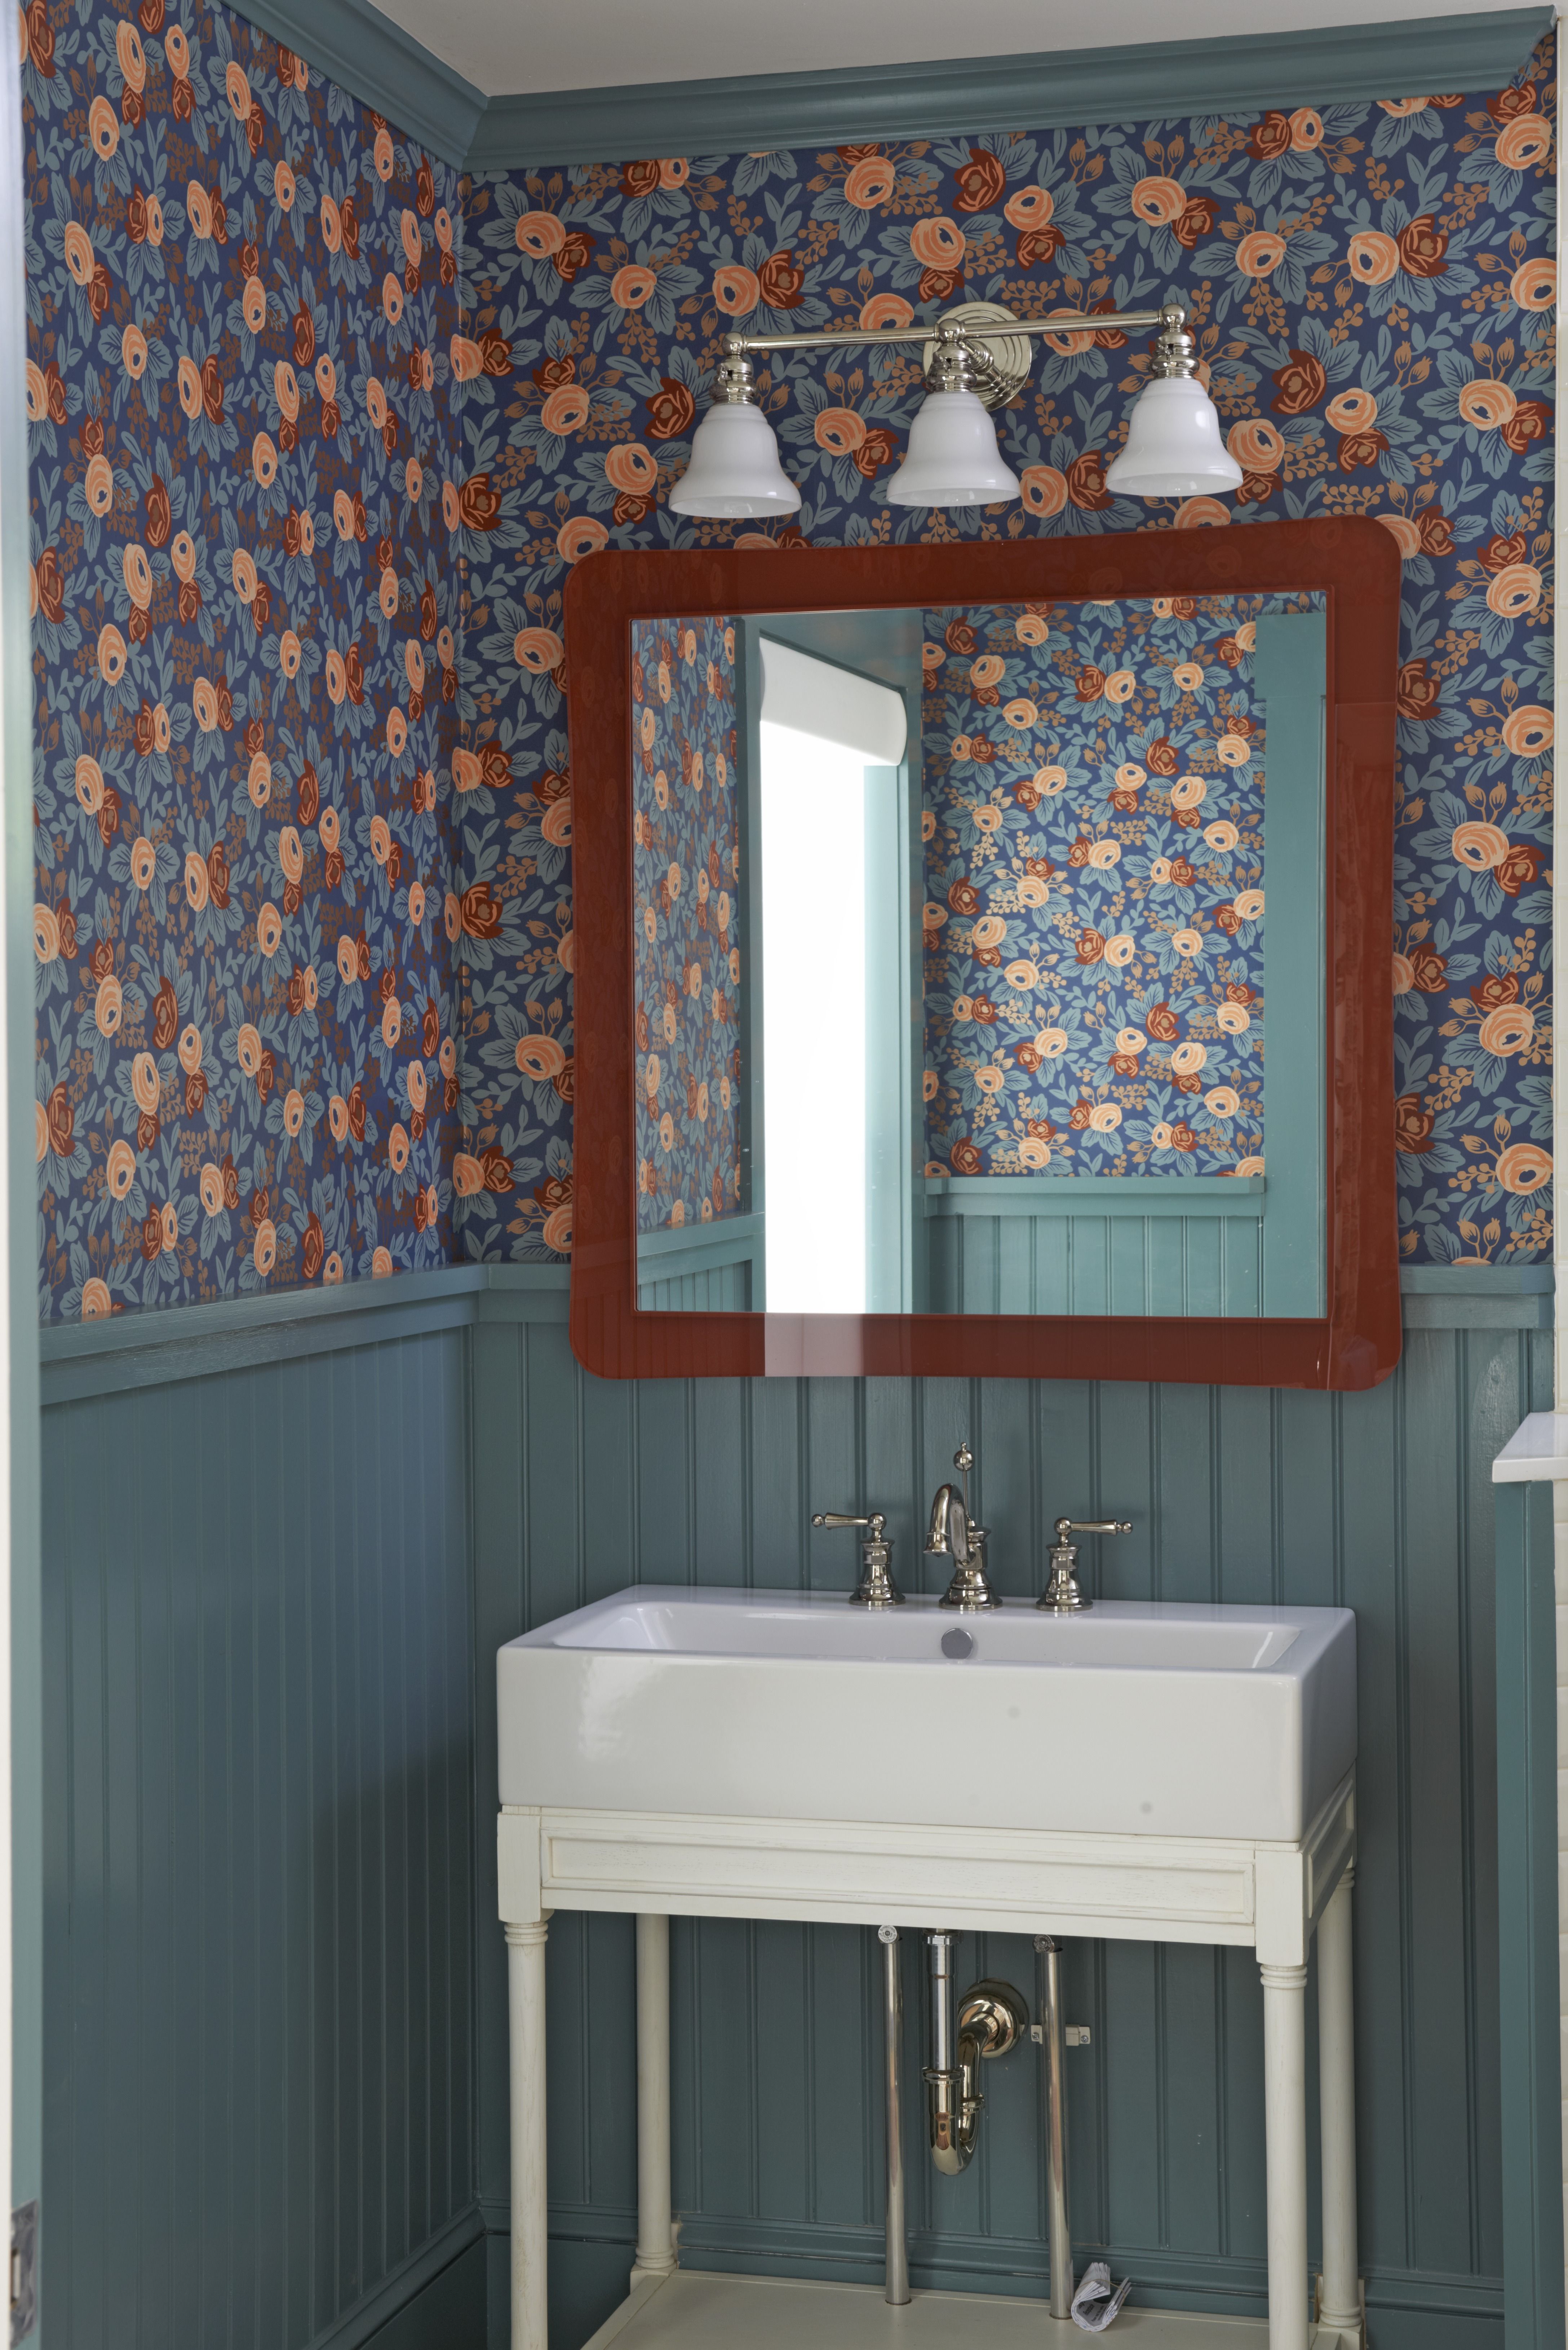 Wallpaper and tile combinations that pair beautifully for a bathroom  Erin  Kestenbaum